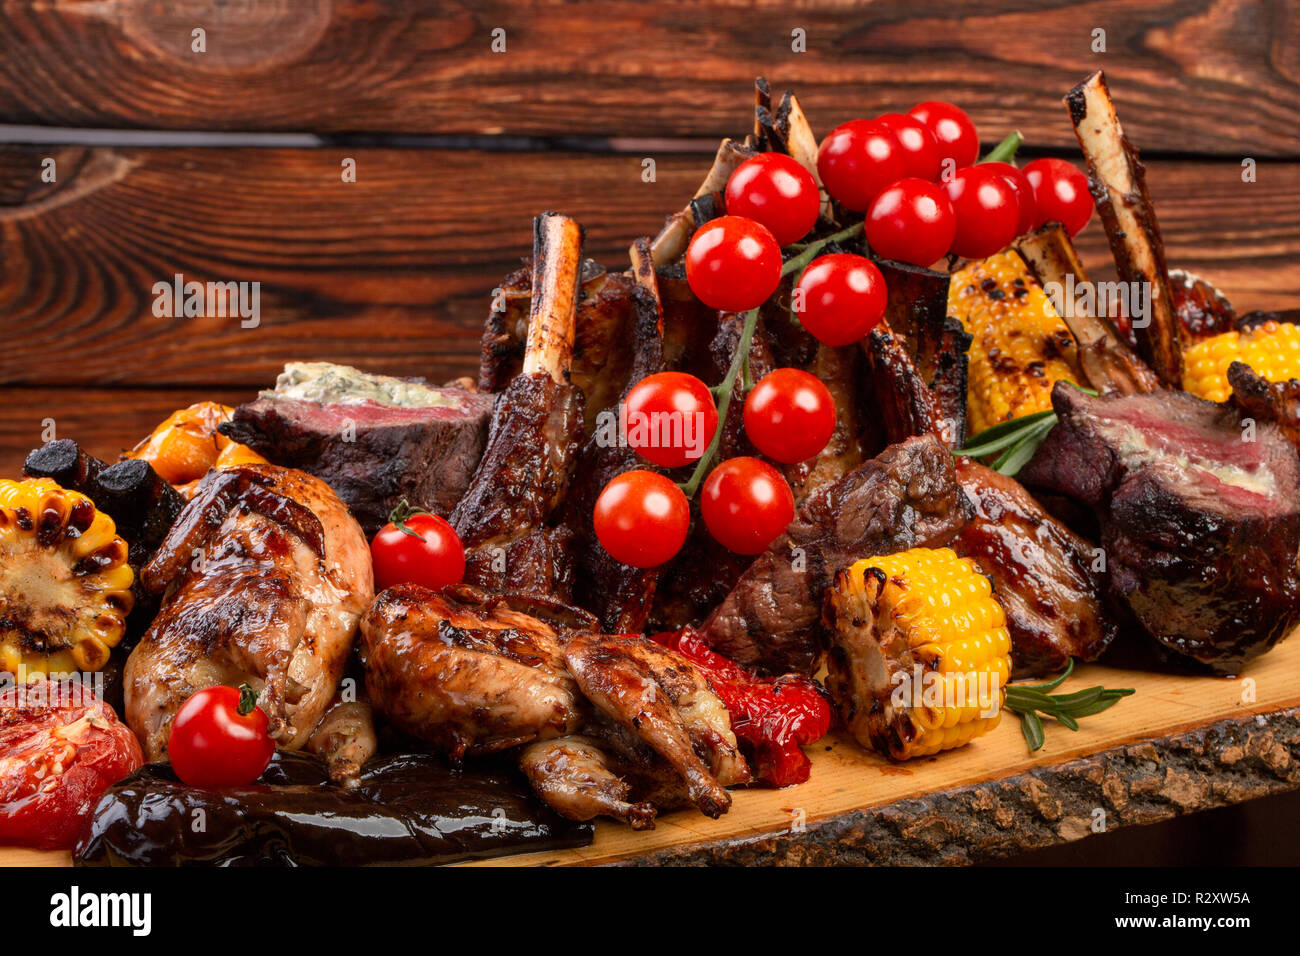 Mixed Grilled meat and vegetables on wooden background. restaurant feed Stock Photo